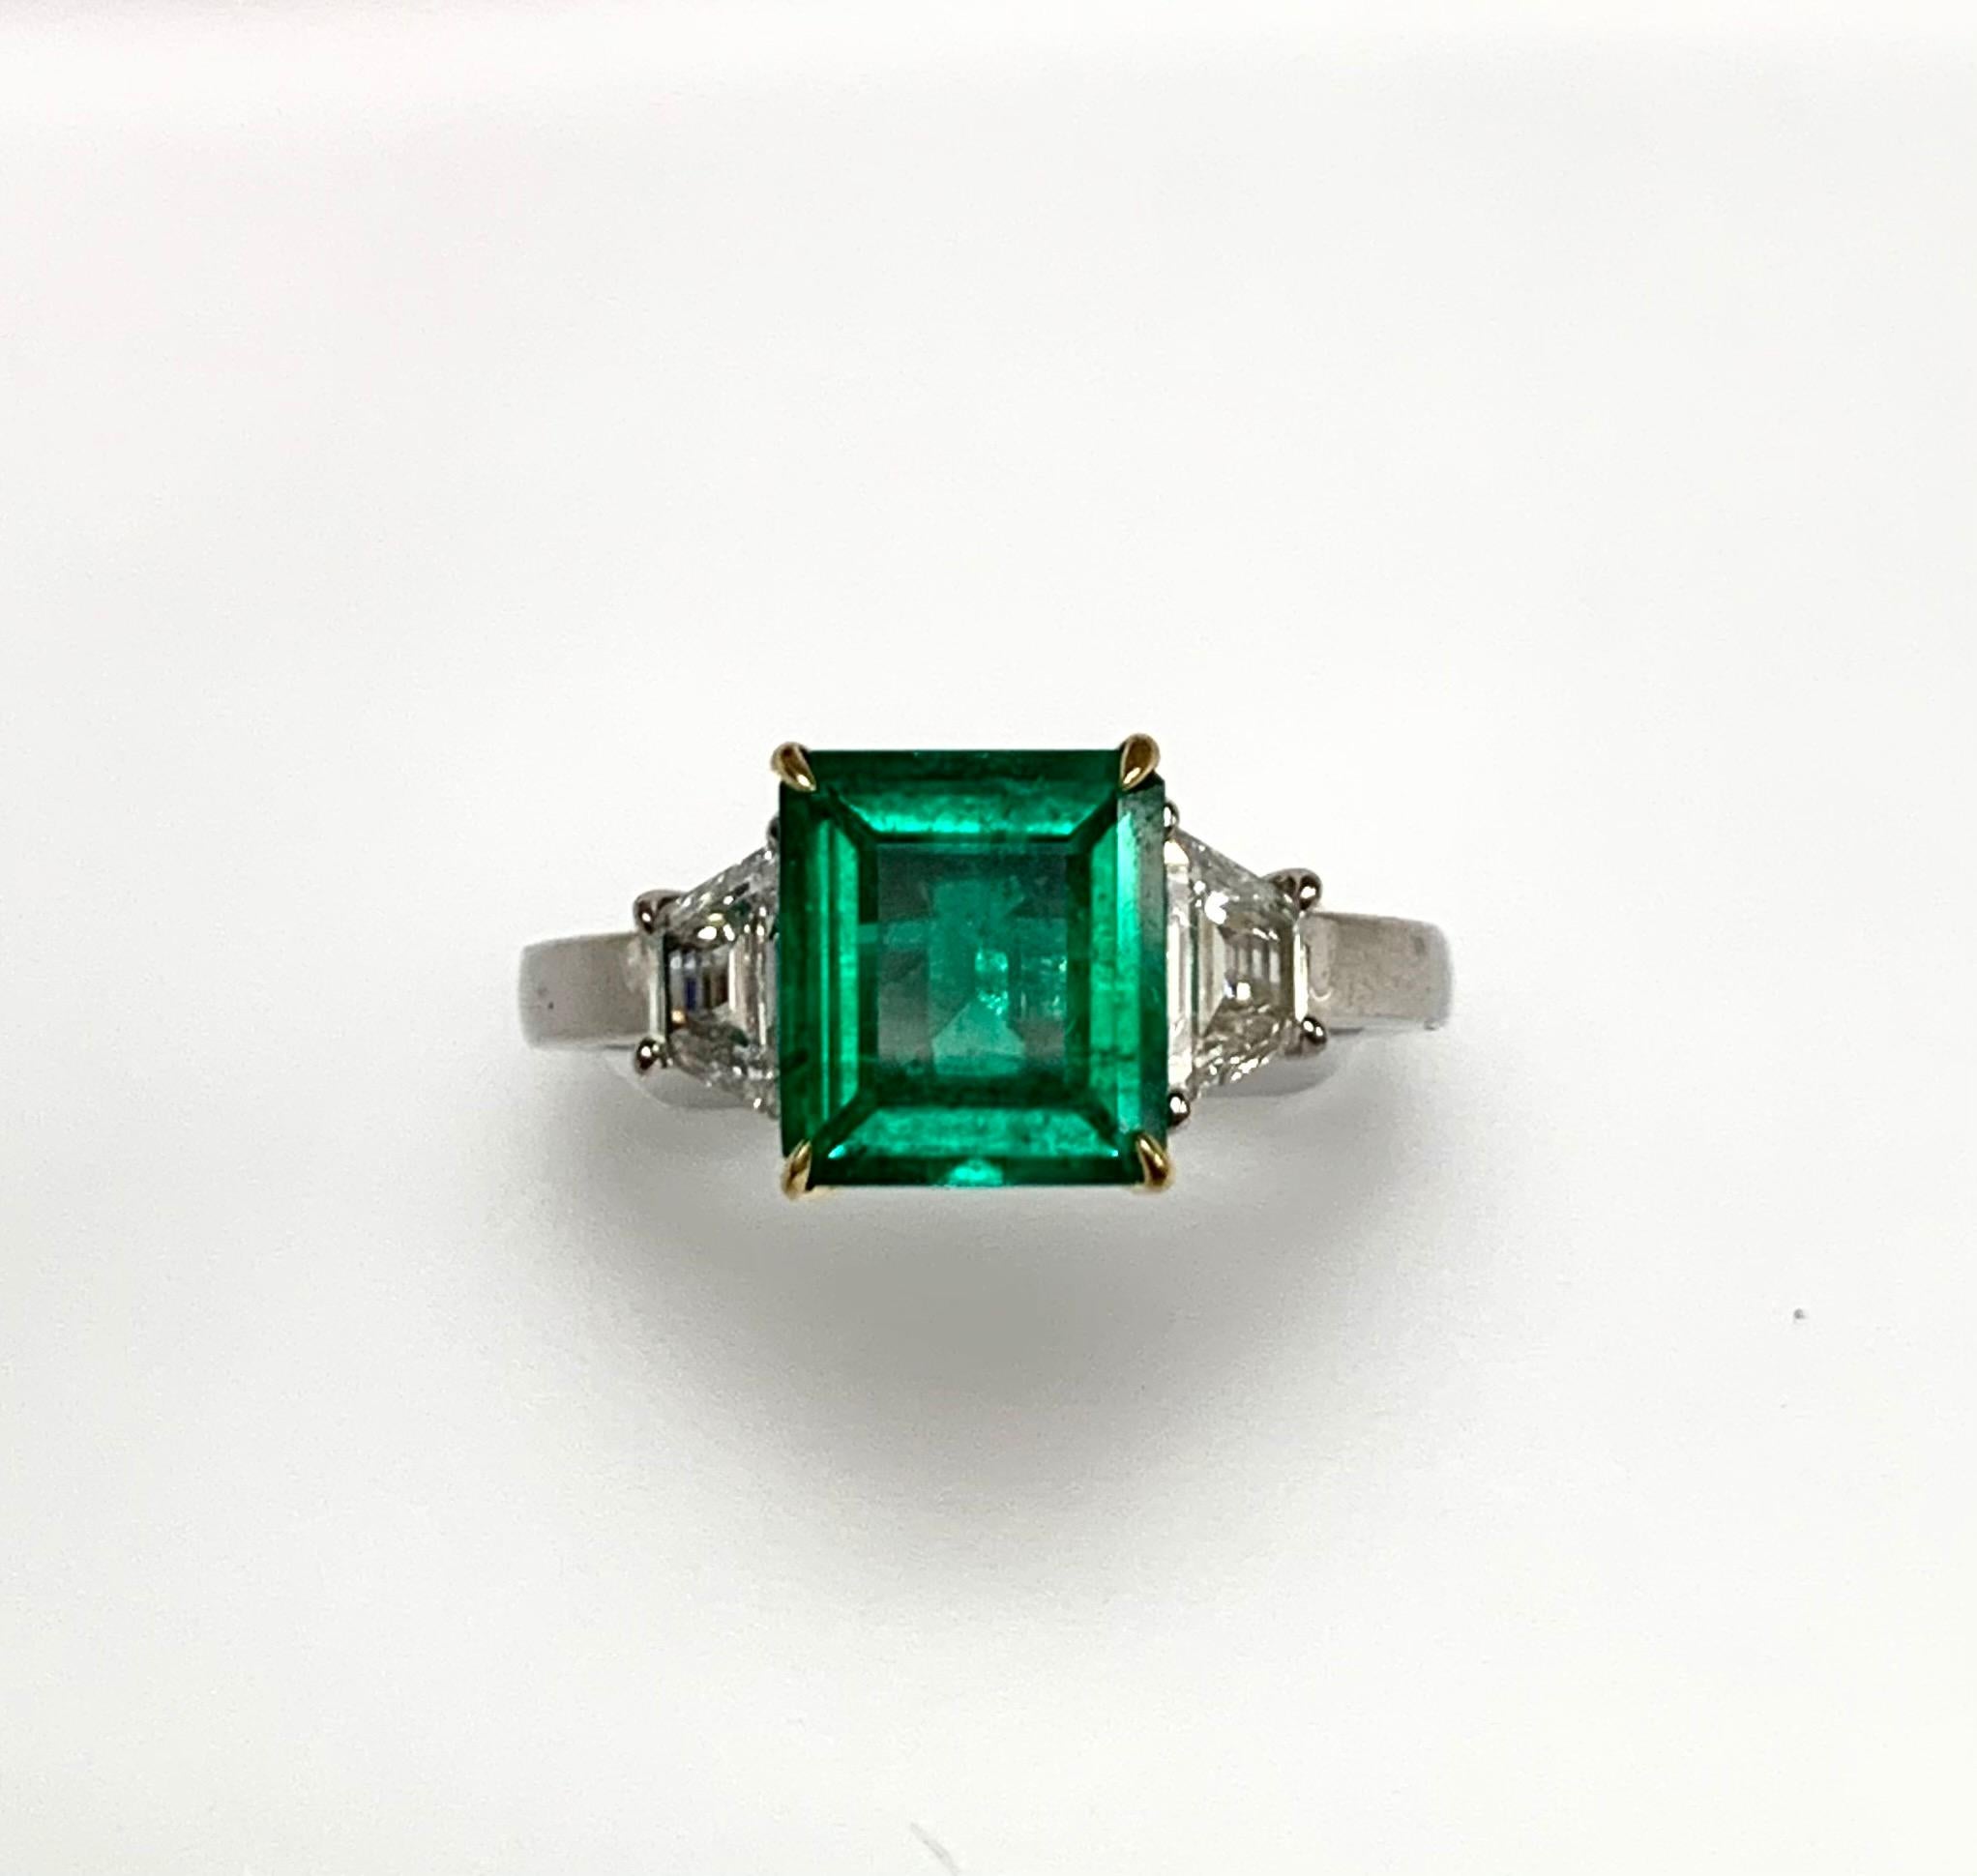 1.85 carat emerald cut Colombian emerald certified by AGL lab set in hand made platinum ring along with 0.60 ct G-h si1 Trapezoid diamonds .